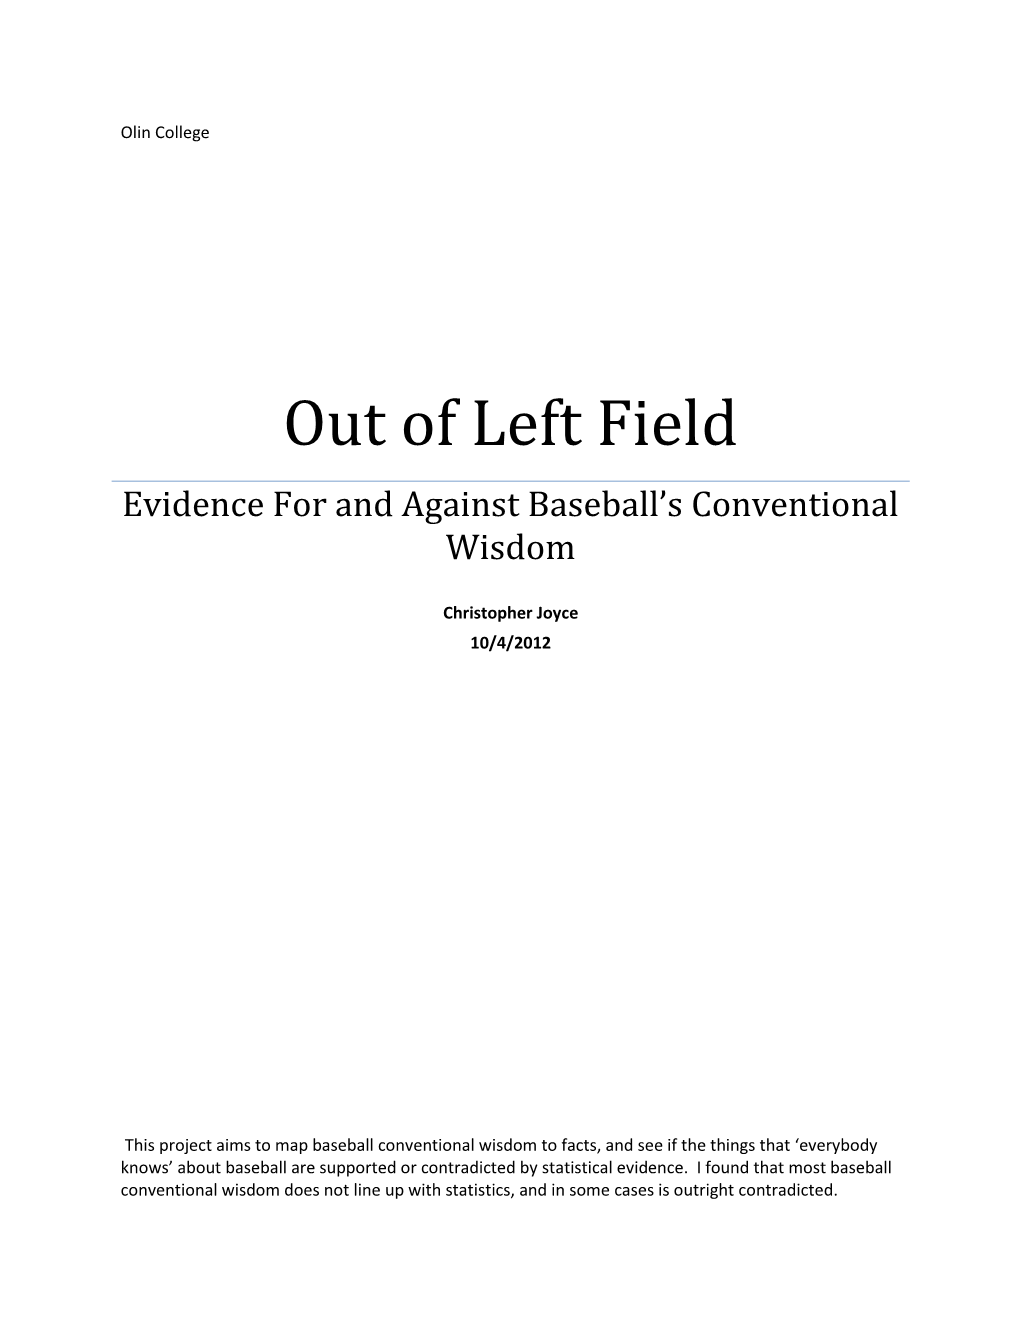 Out of Left Field Evidence for and Against Baseball’S Conventional Wisdom